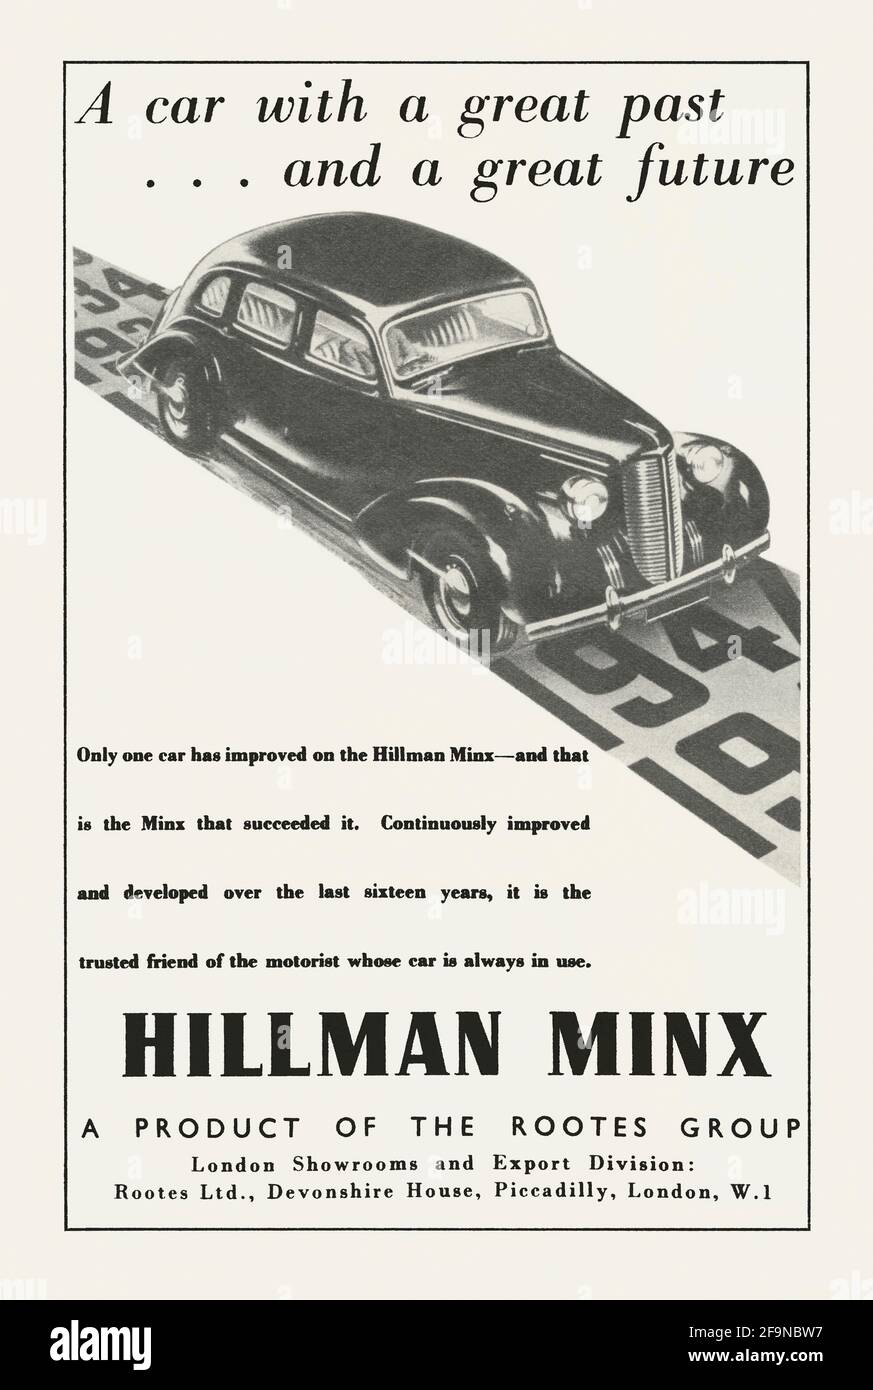 A 1940s advert for a Hillman Minx car – it appeared in British magazine in 1947. The Minx sold between 1945 and 1947 became known as the Minx Mark I (as illustrated here). This was the first Minx with a protruding boot (trunk). The Hillman Minx was a mid-sized British family car produced from 1931 to 1970. There were many versions of the Minx over that period, as well as cars badged as Humber, Singer, and Sunbeam from the Rootes Group, including the Singer Gazelle and Sunbeam Rapier – vintage nineteen-forties graphics. Stock Photo